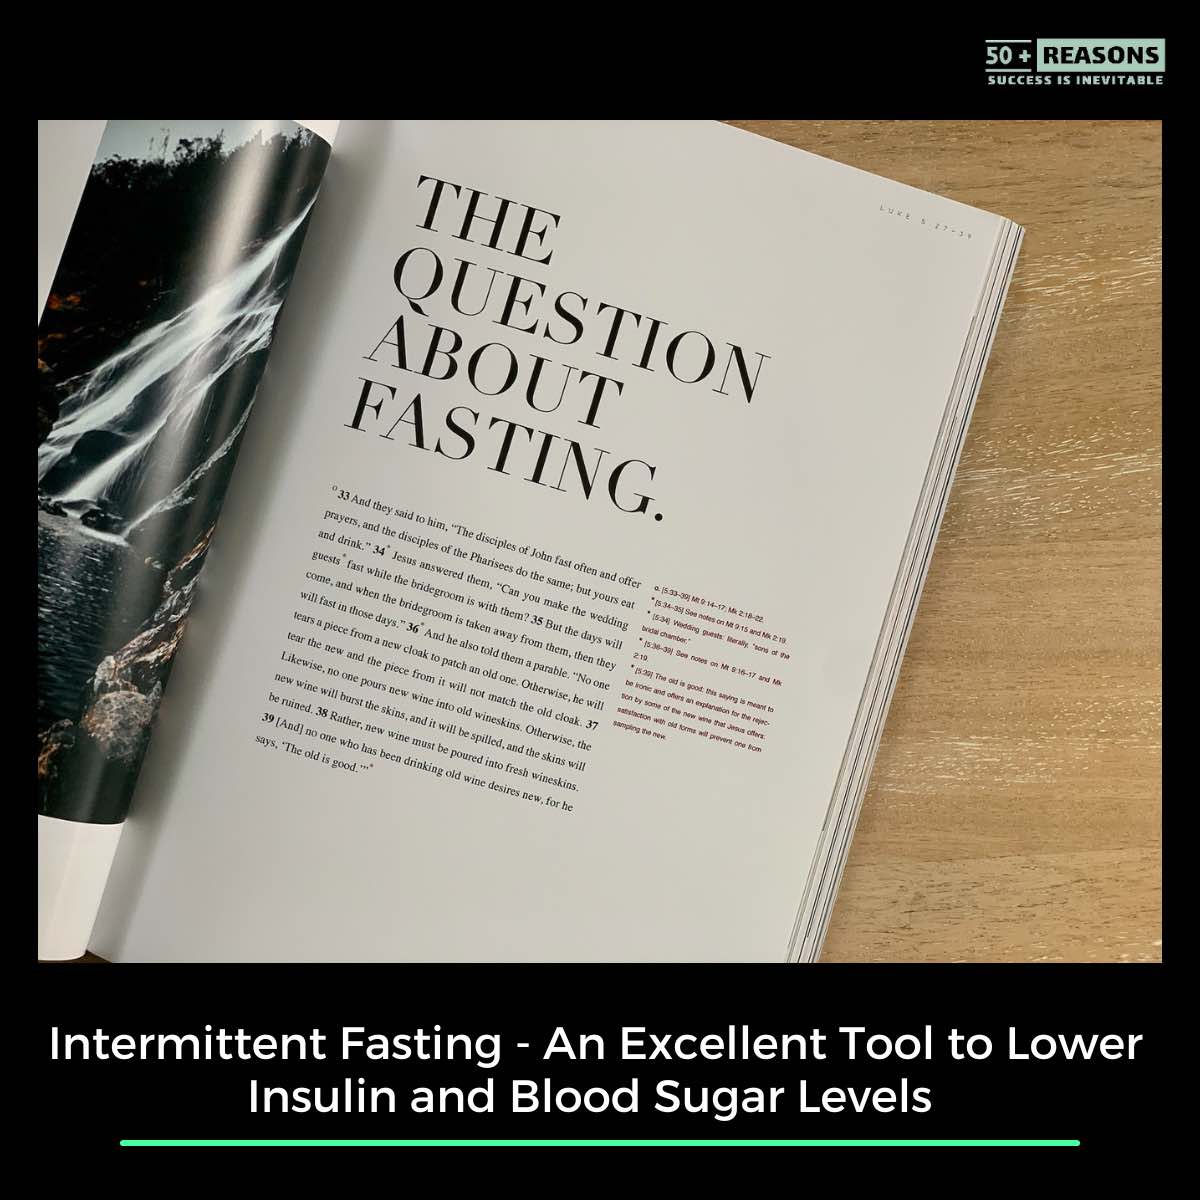 Intermittent Fasting - An Excellent Tool to Lower Insulin and Blood Sugar Levels